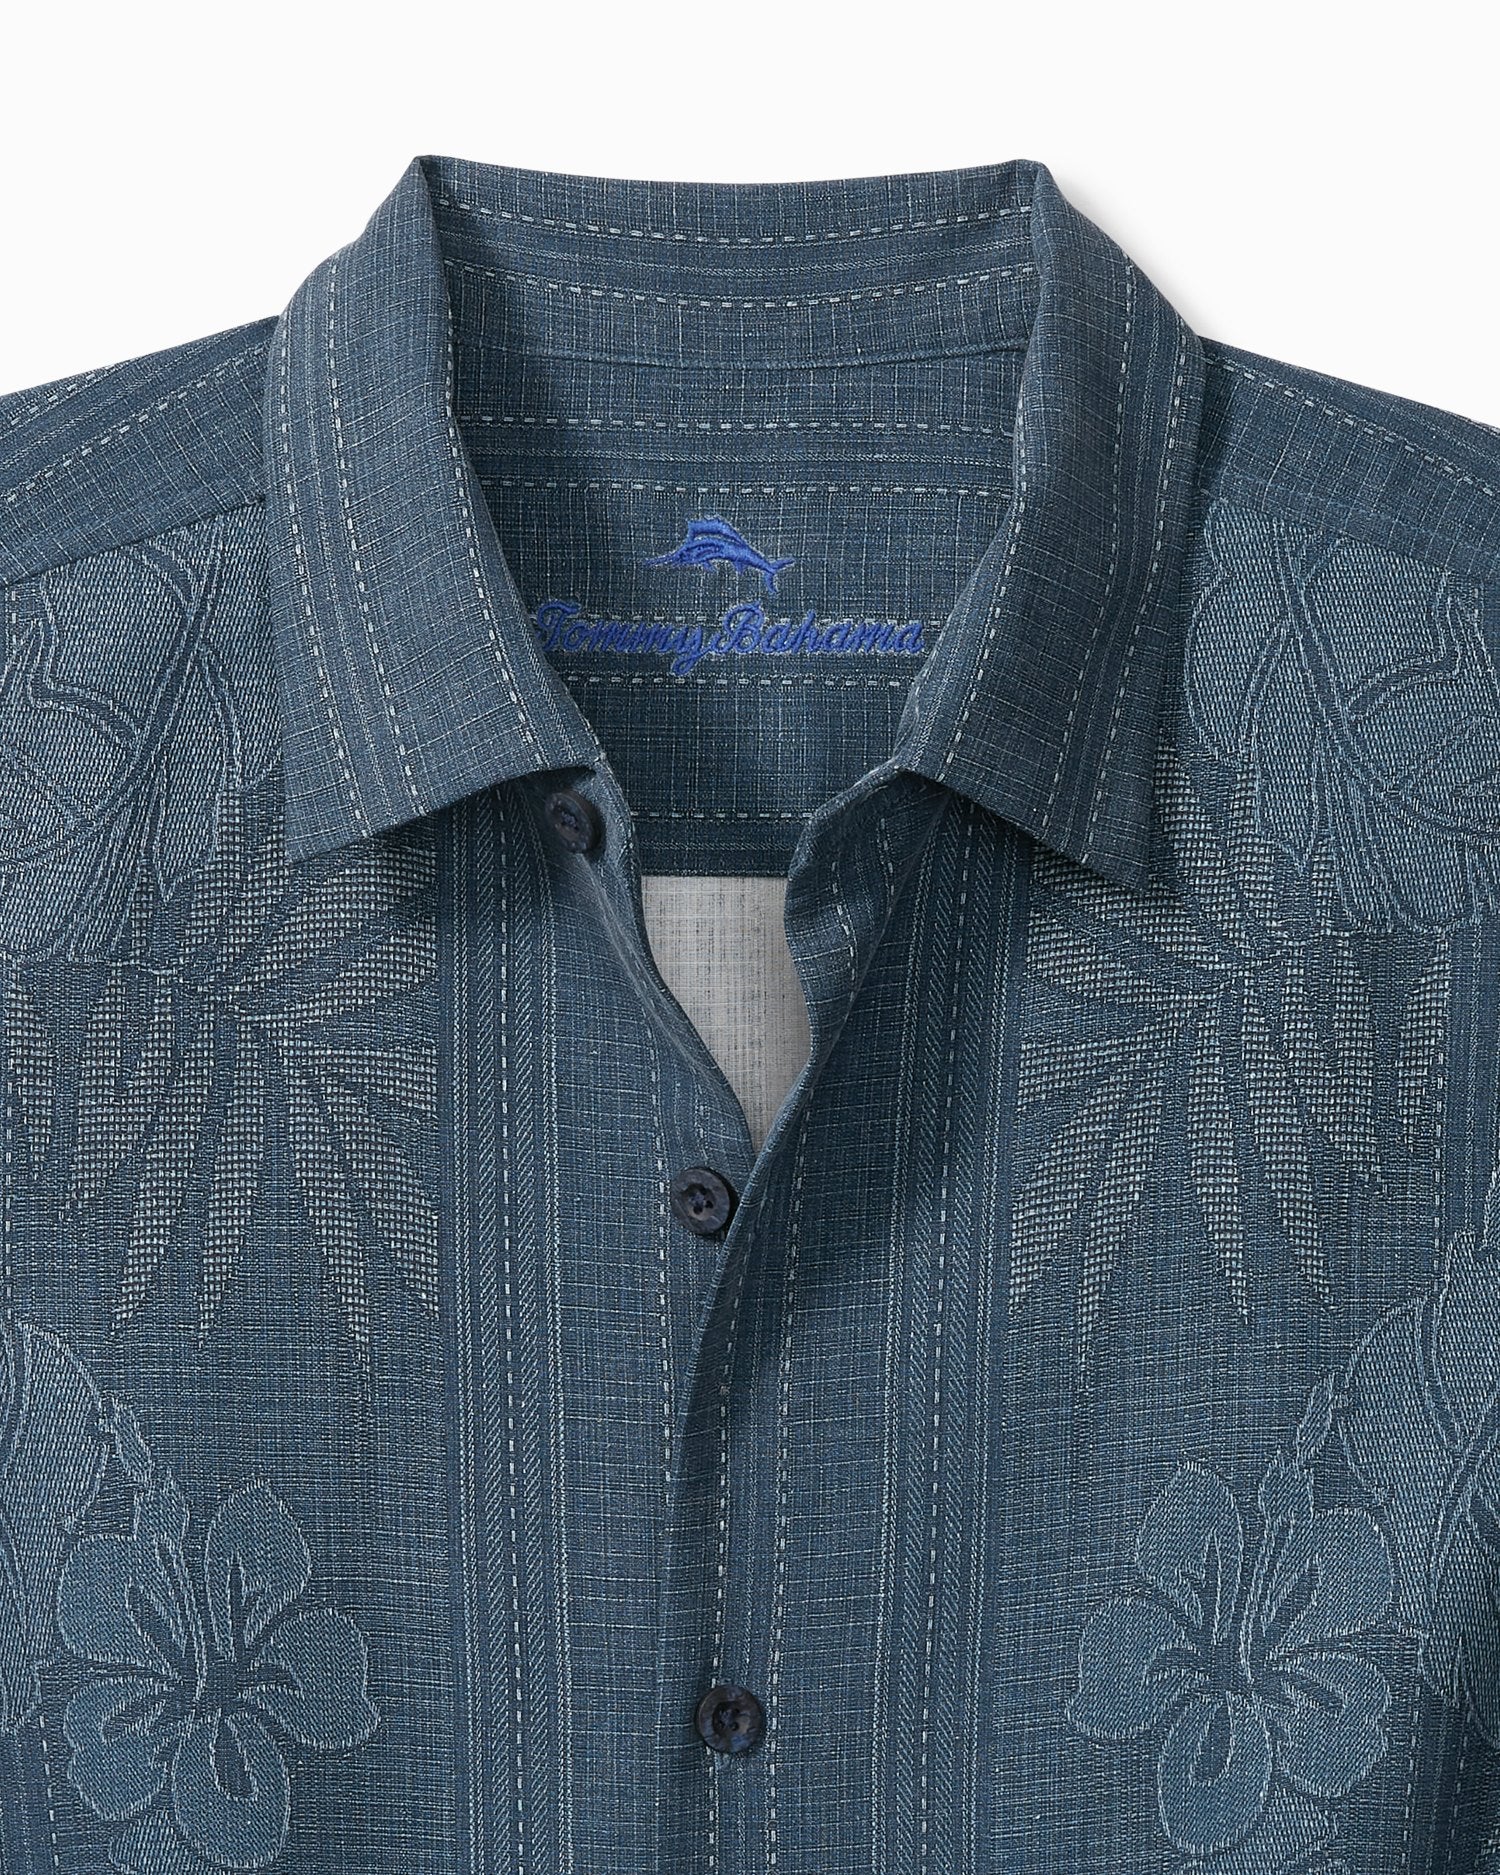 Tommy Bahama L.A. Dodgers Camp Shirt - clothing & accessories - by